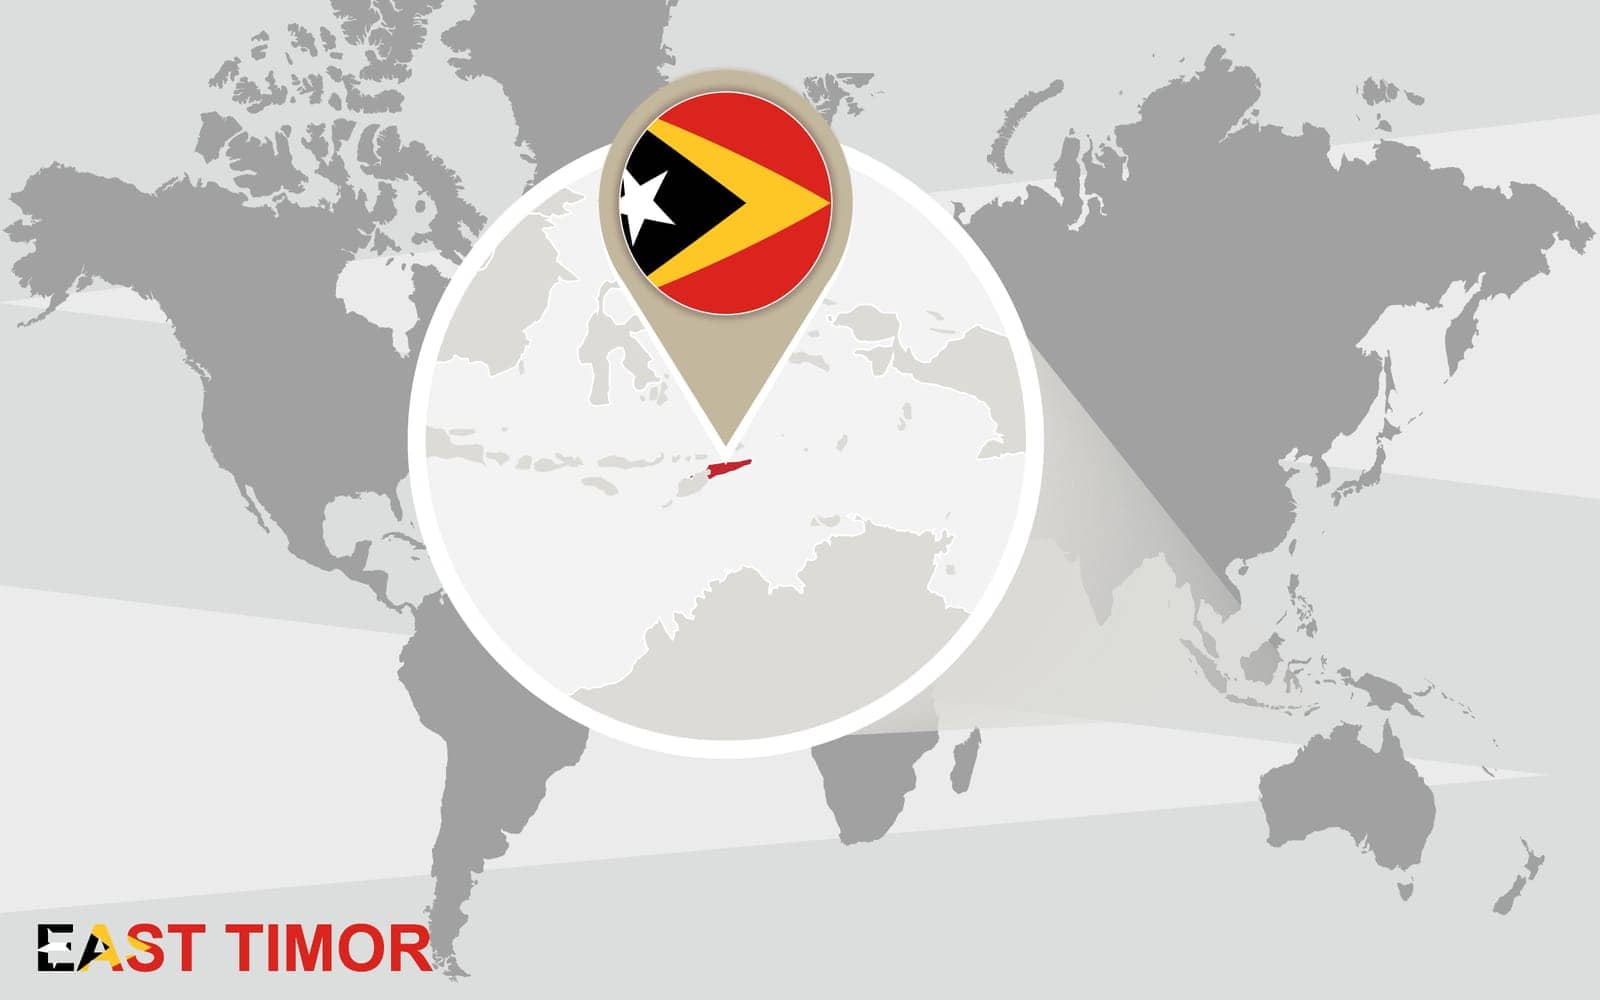 World map with magnified East Timor. East Timor flag and map.